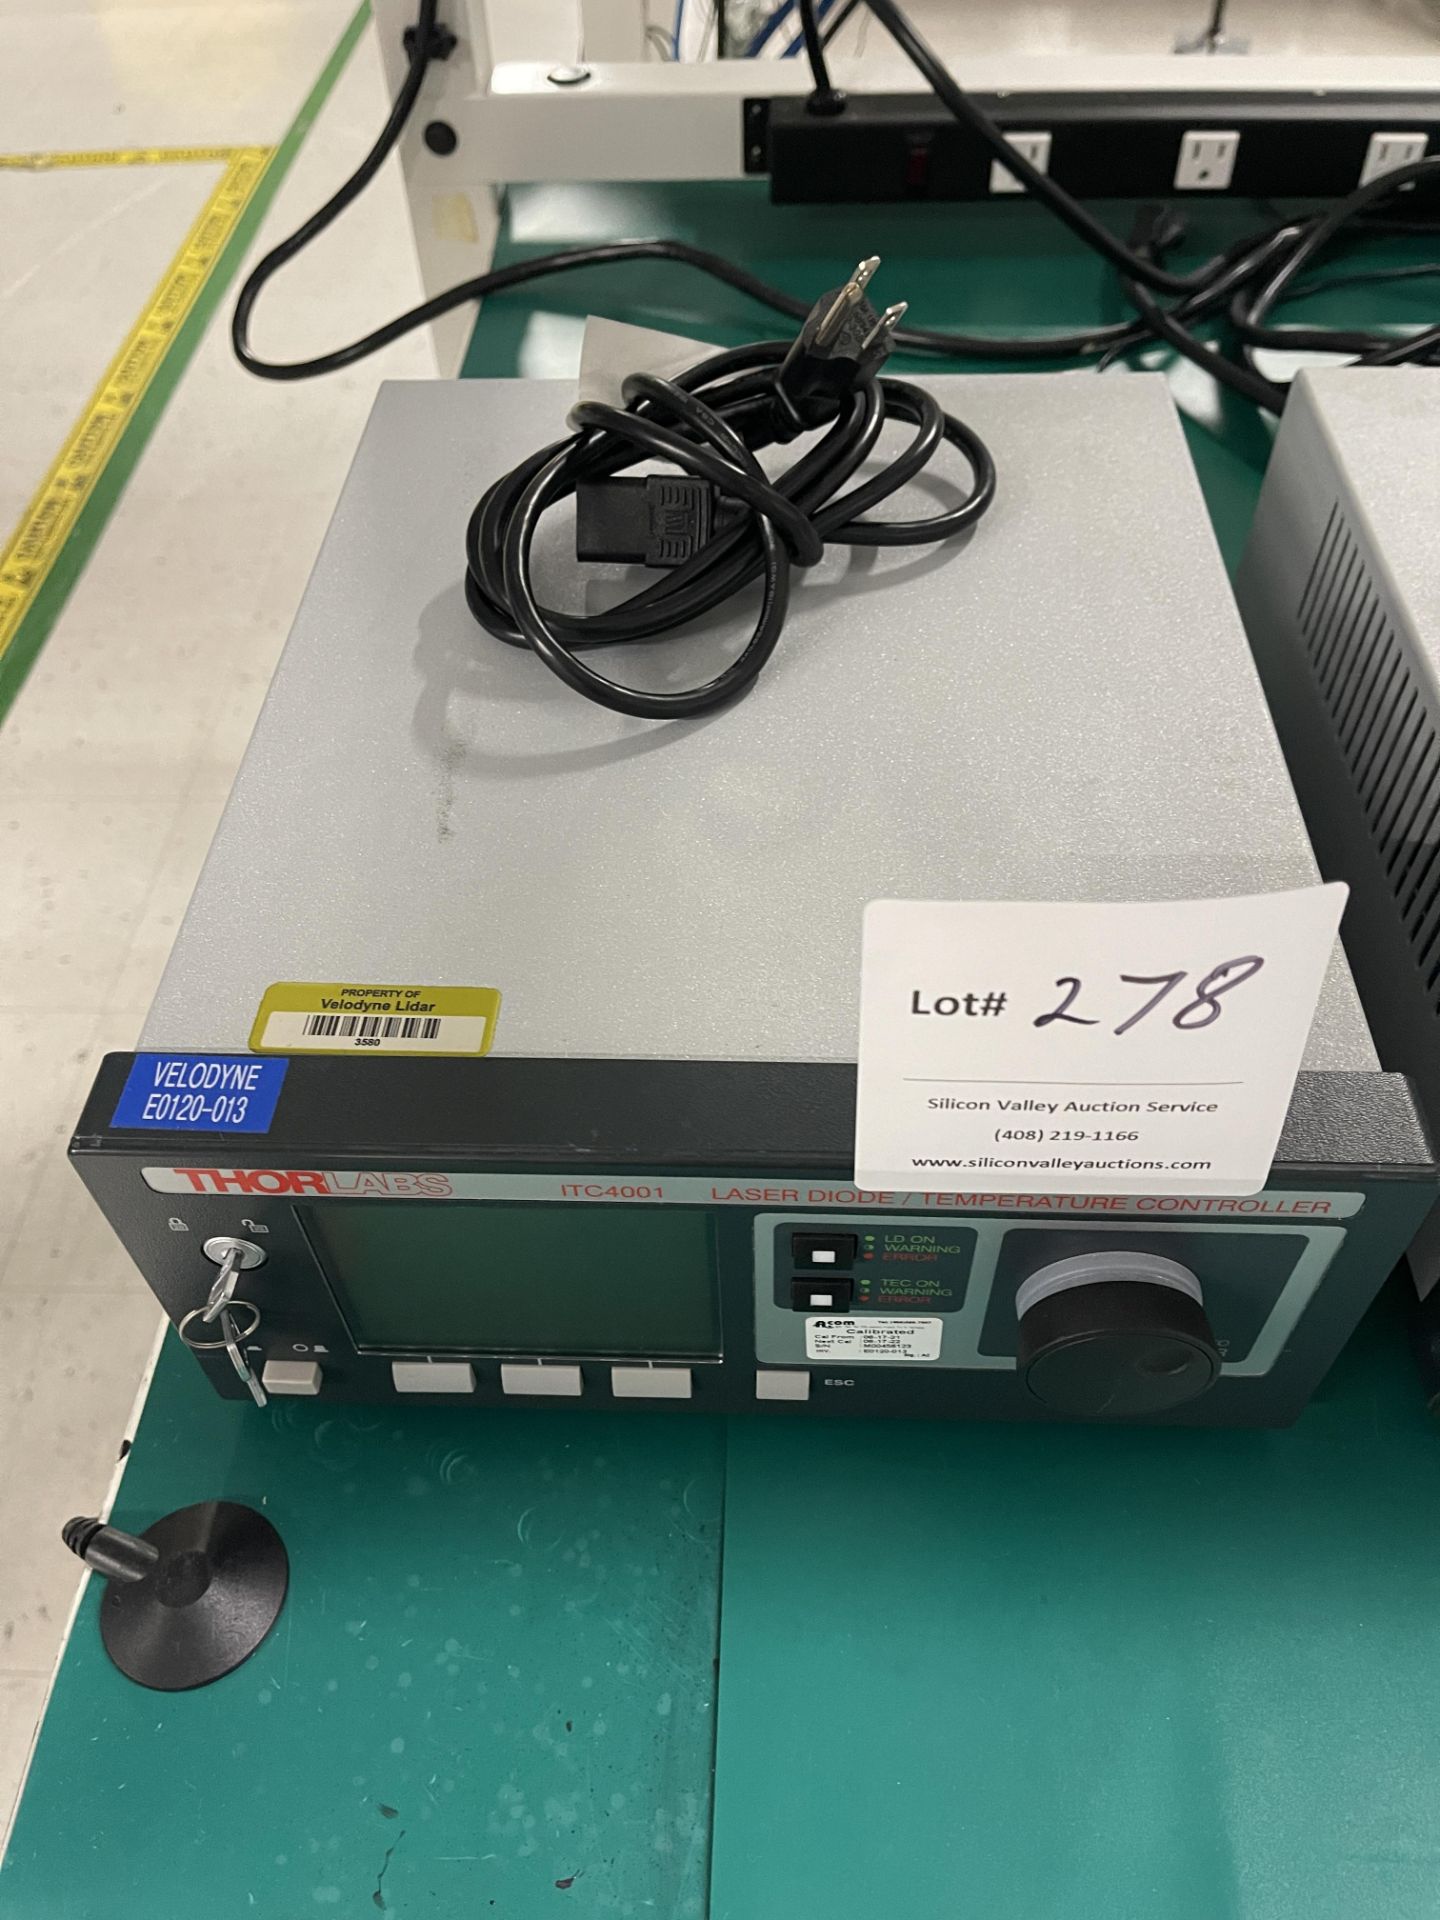 ThorLabs ITC4001 Laser Diode/Temperature Controller